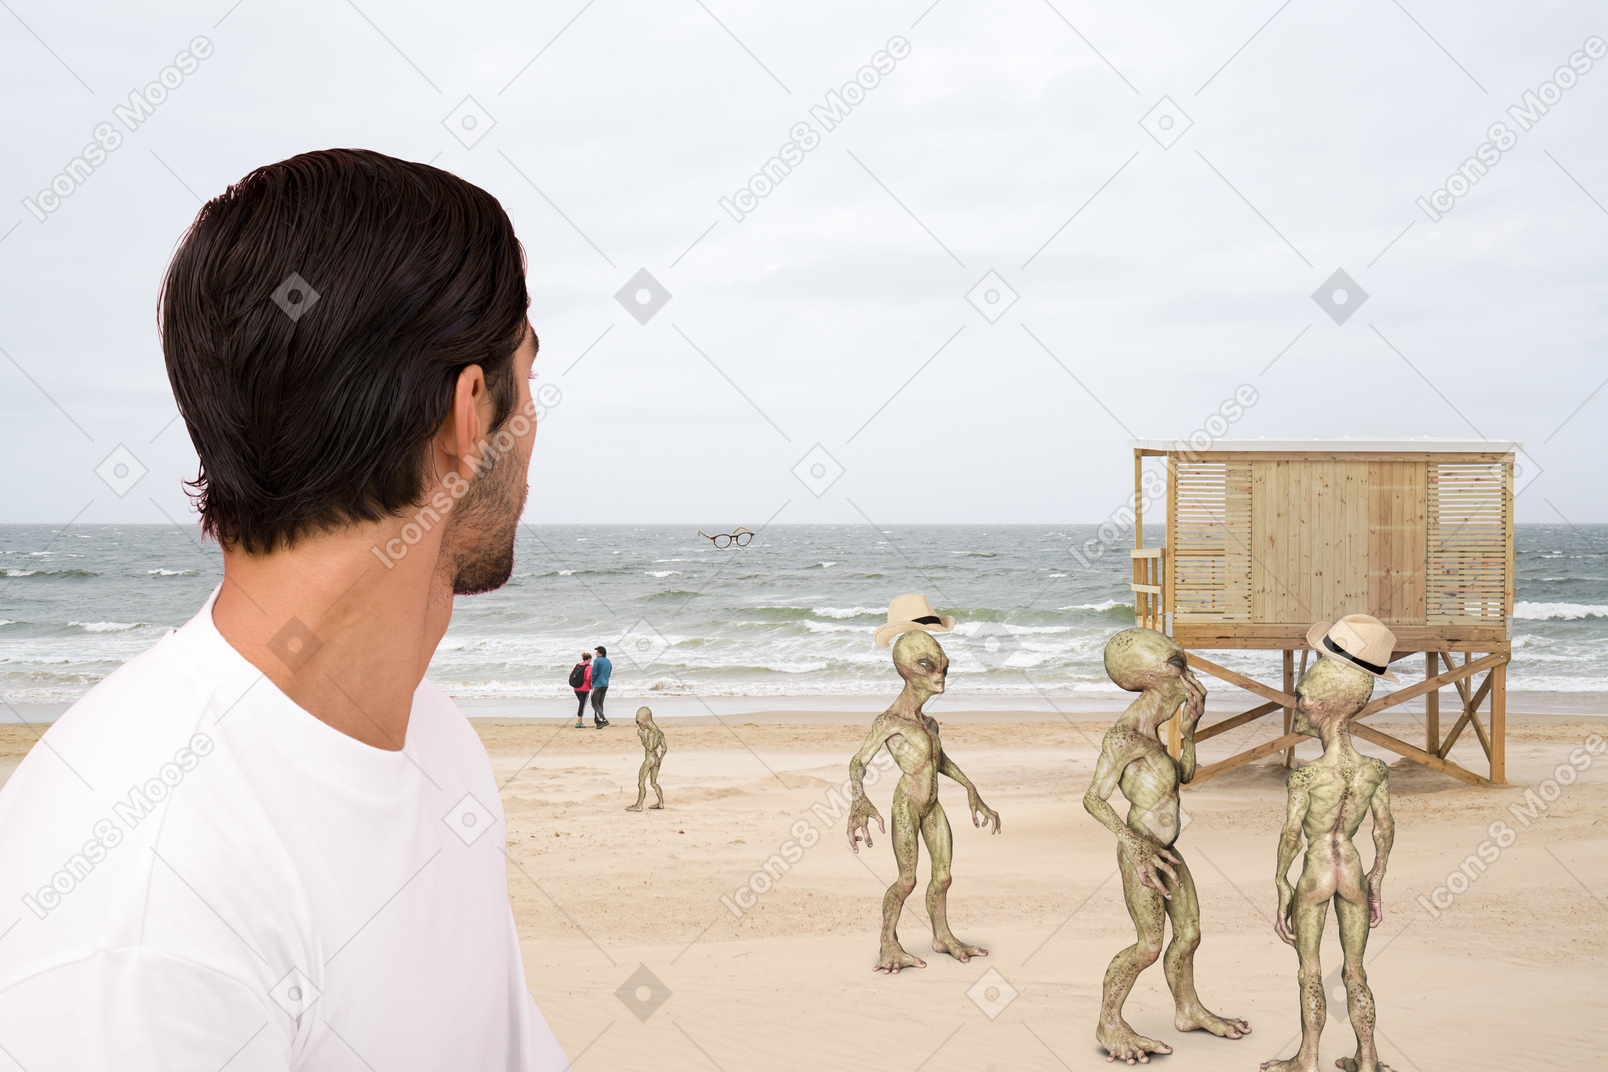 A man on a beach looking at a group of aliens